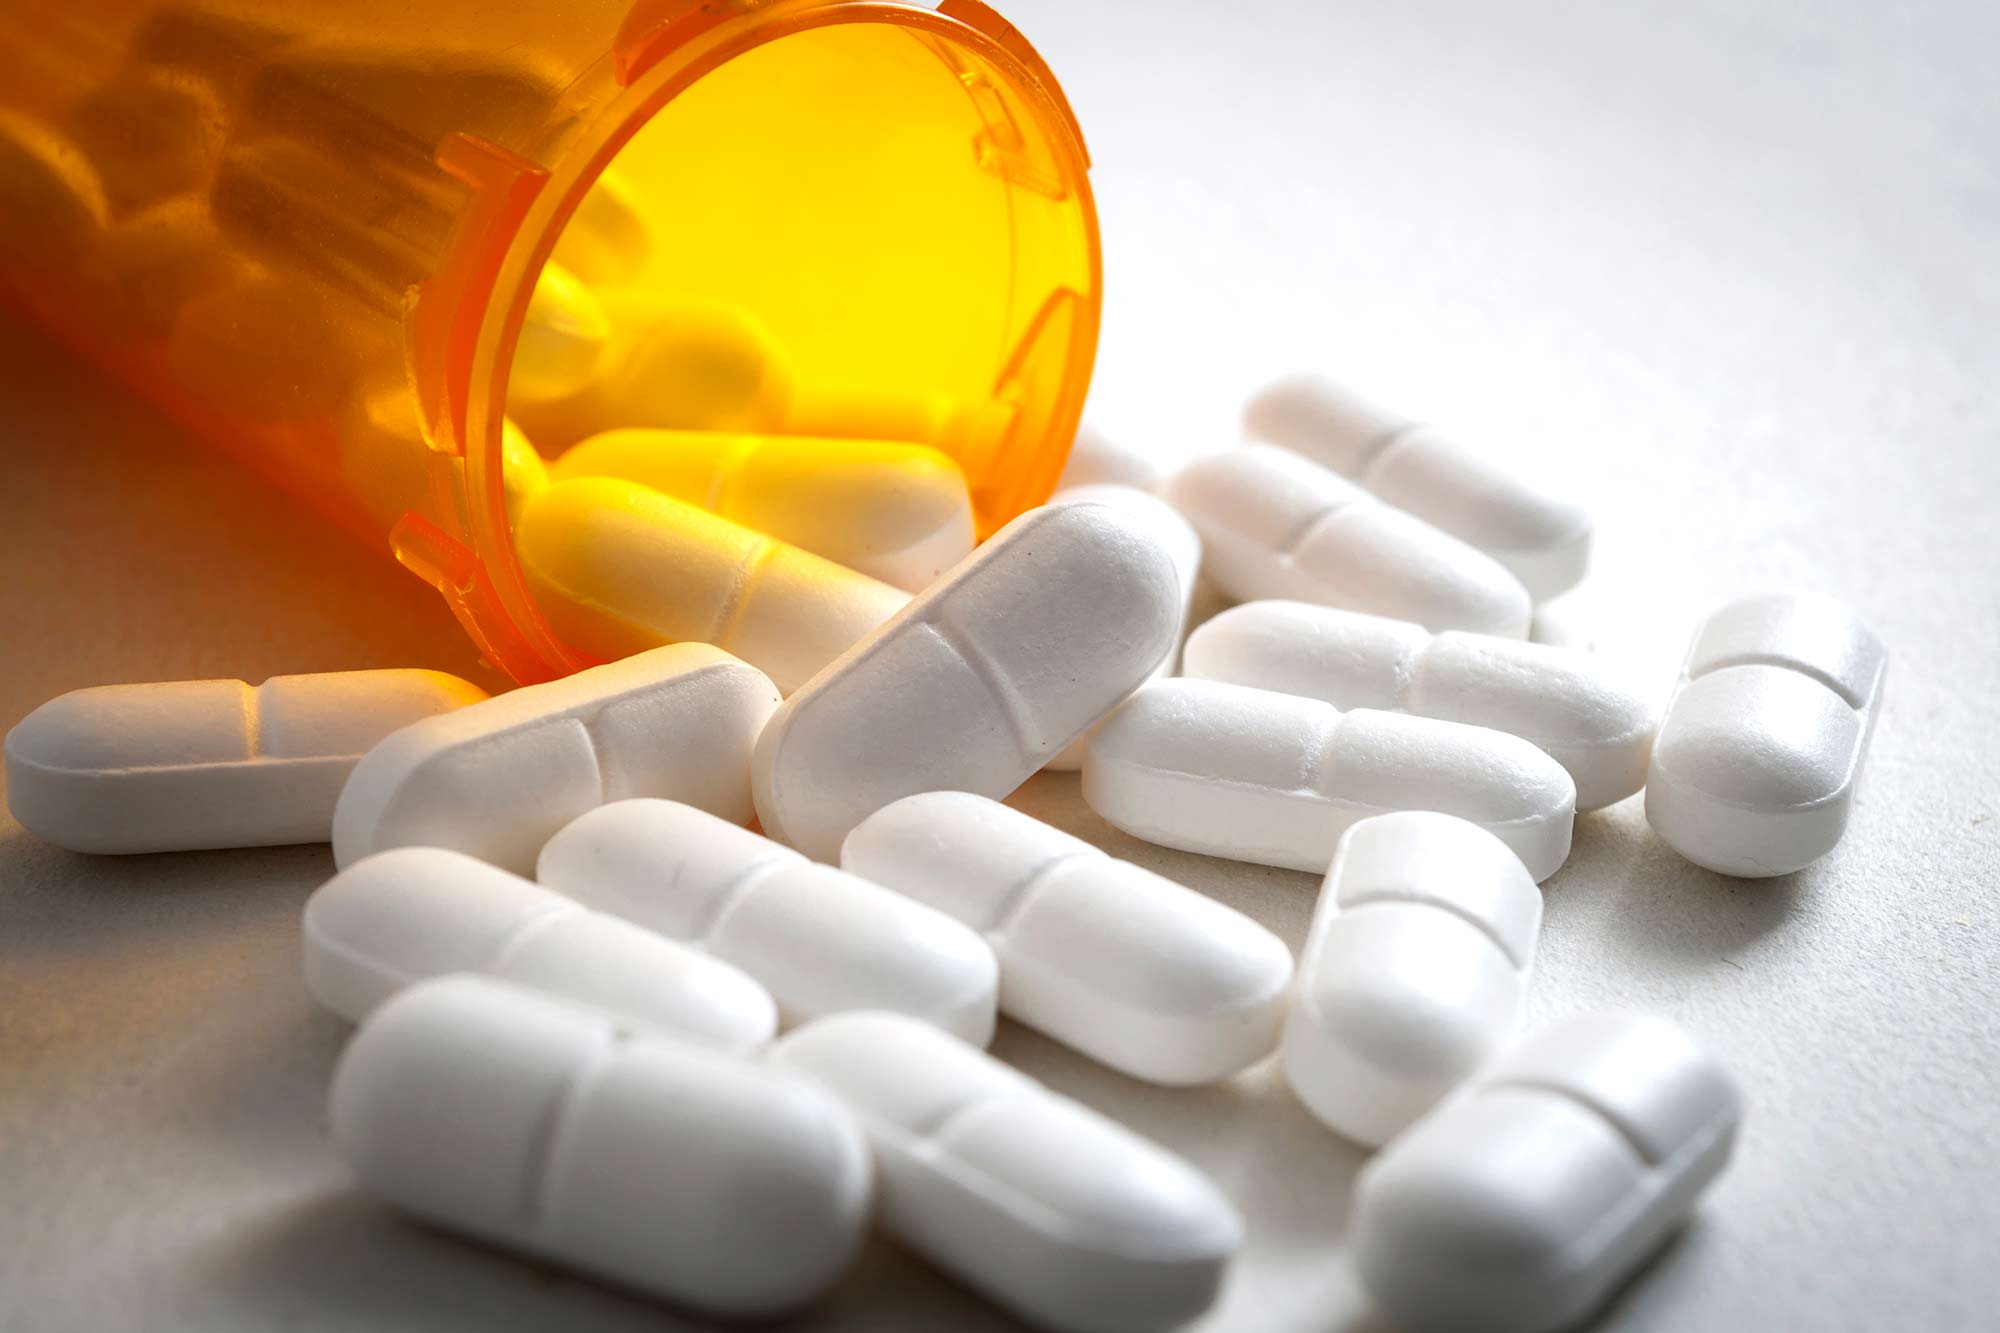 A study has found opioids do not help reduce pain after tooth extraction